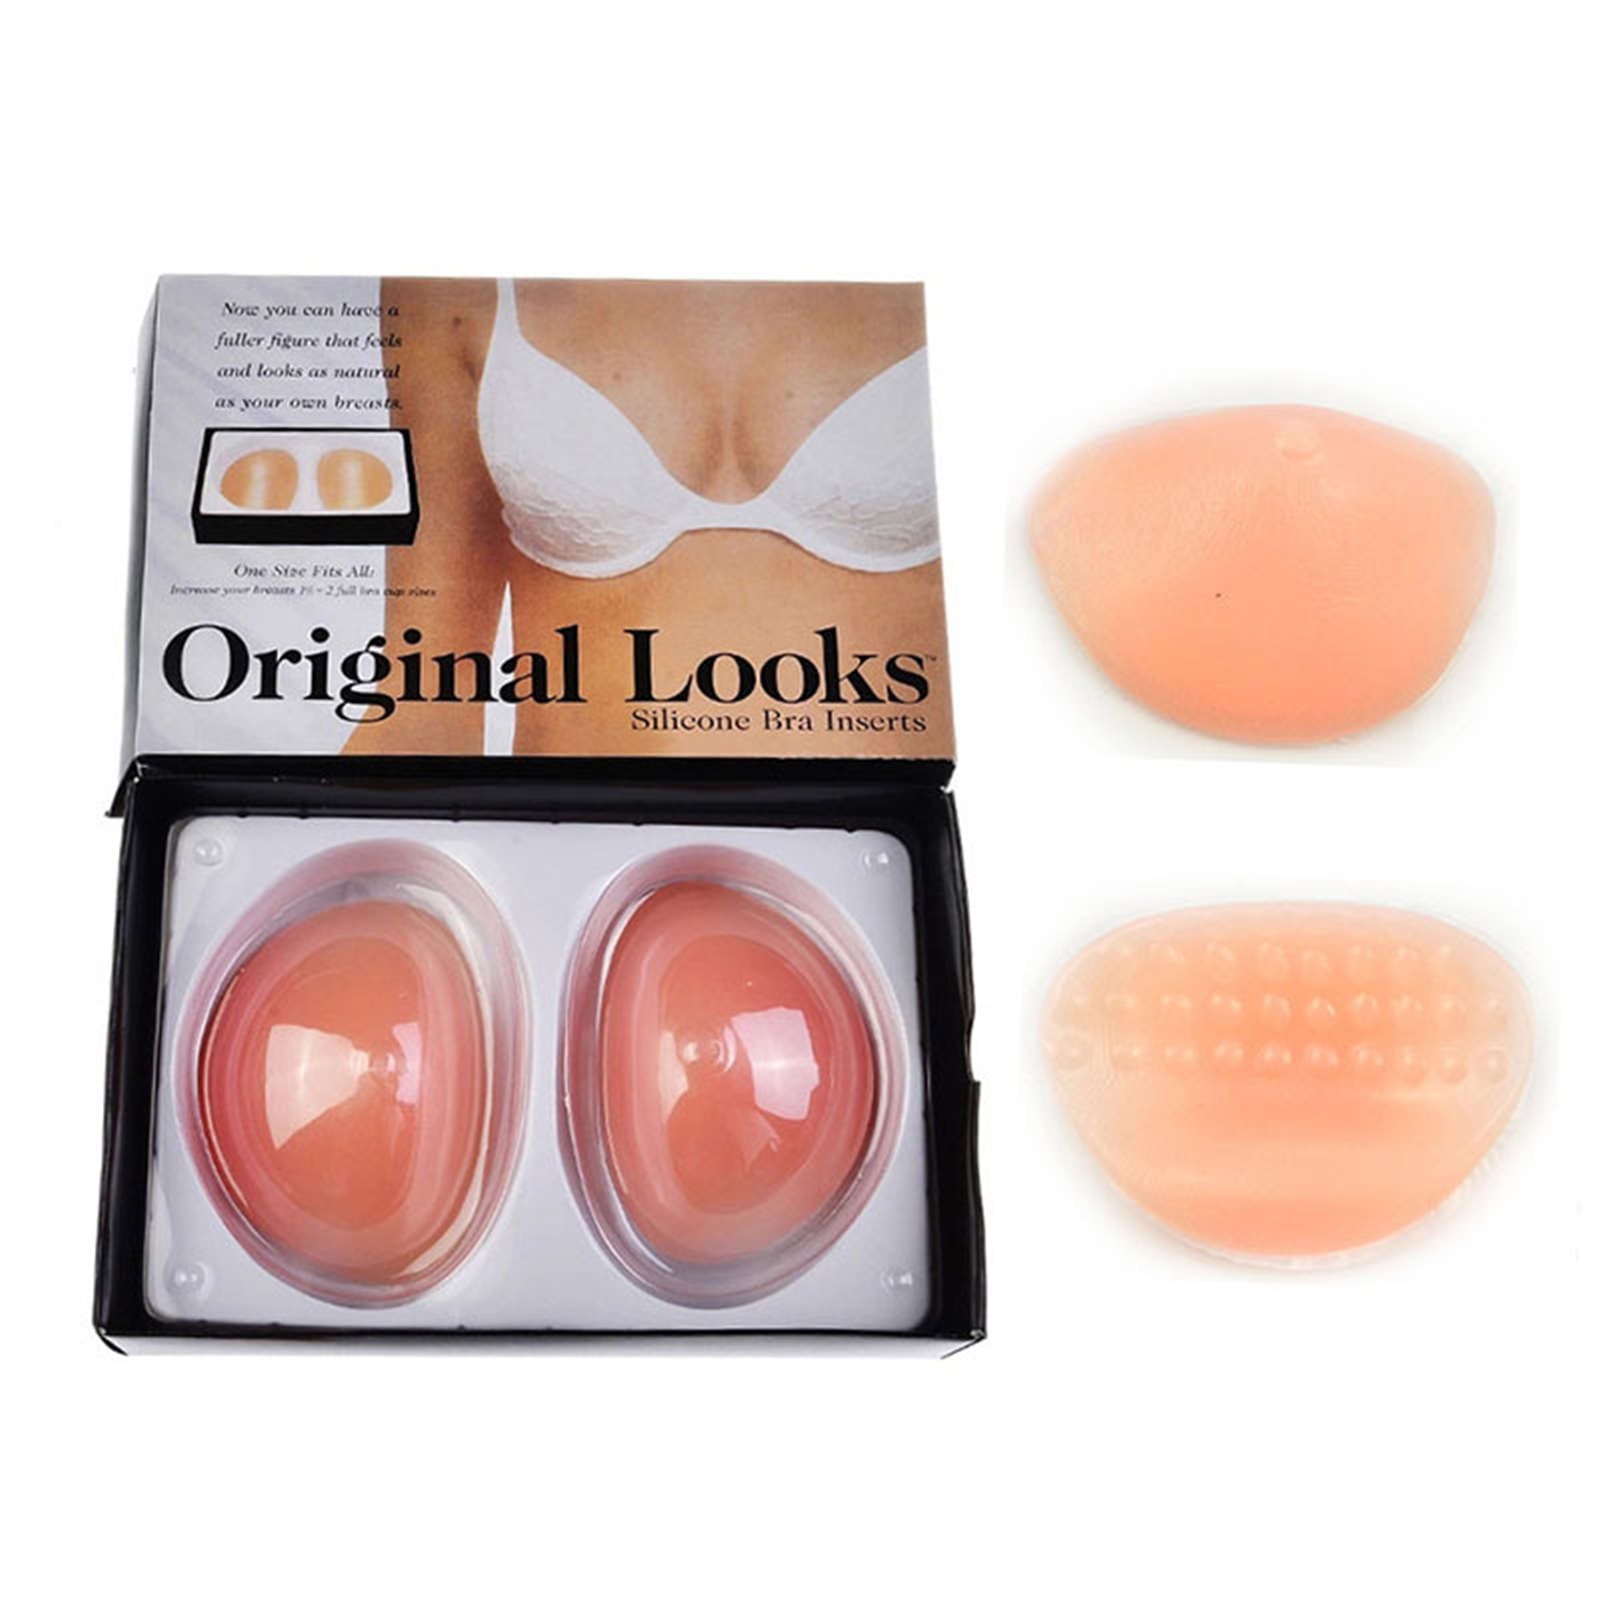  1 Pair Self Adhesive Silicone Breast Forms Waterdrop Prosthesis  B-EE Cup False Boobs For Mastectomy Fake Boobs Prosthesis Crossdresser  Transgender Cosplay ( Color : Suntan , Size : D Cup (1000g/Pair) 